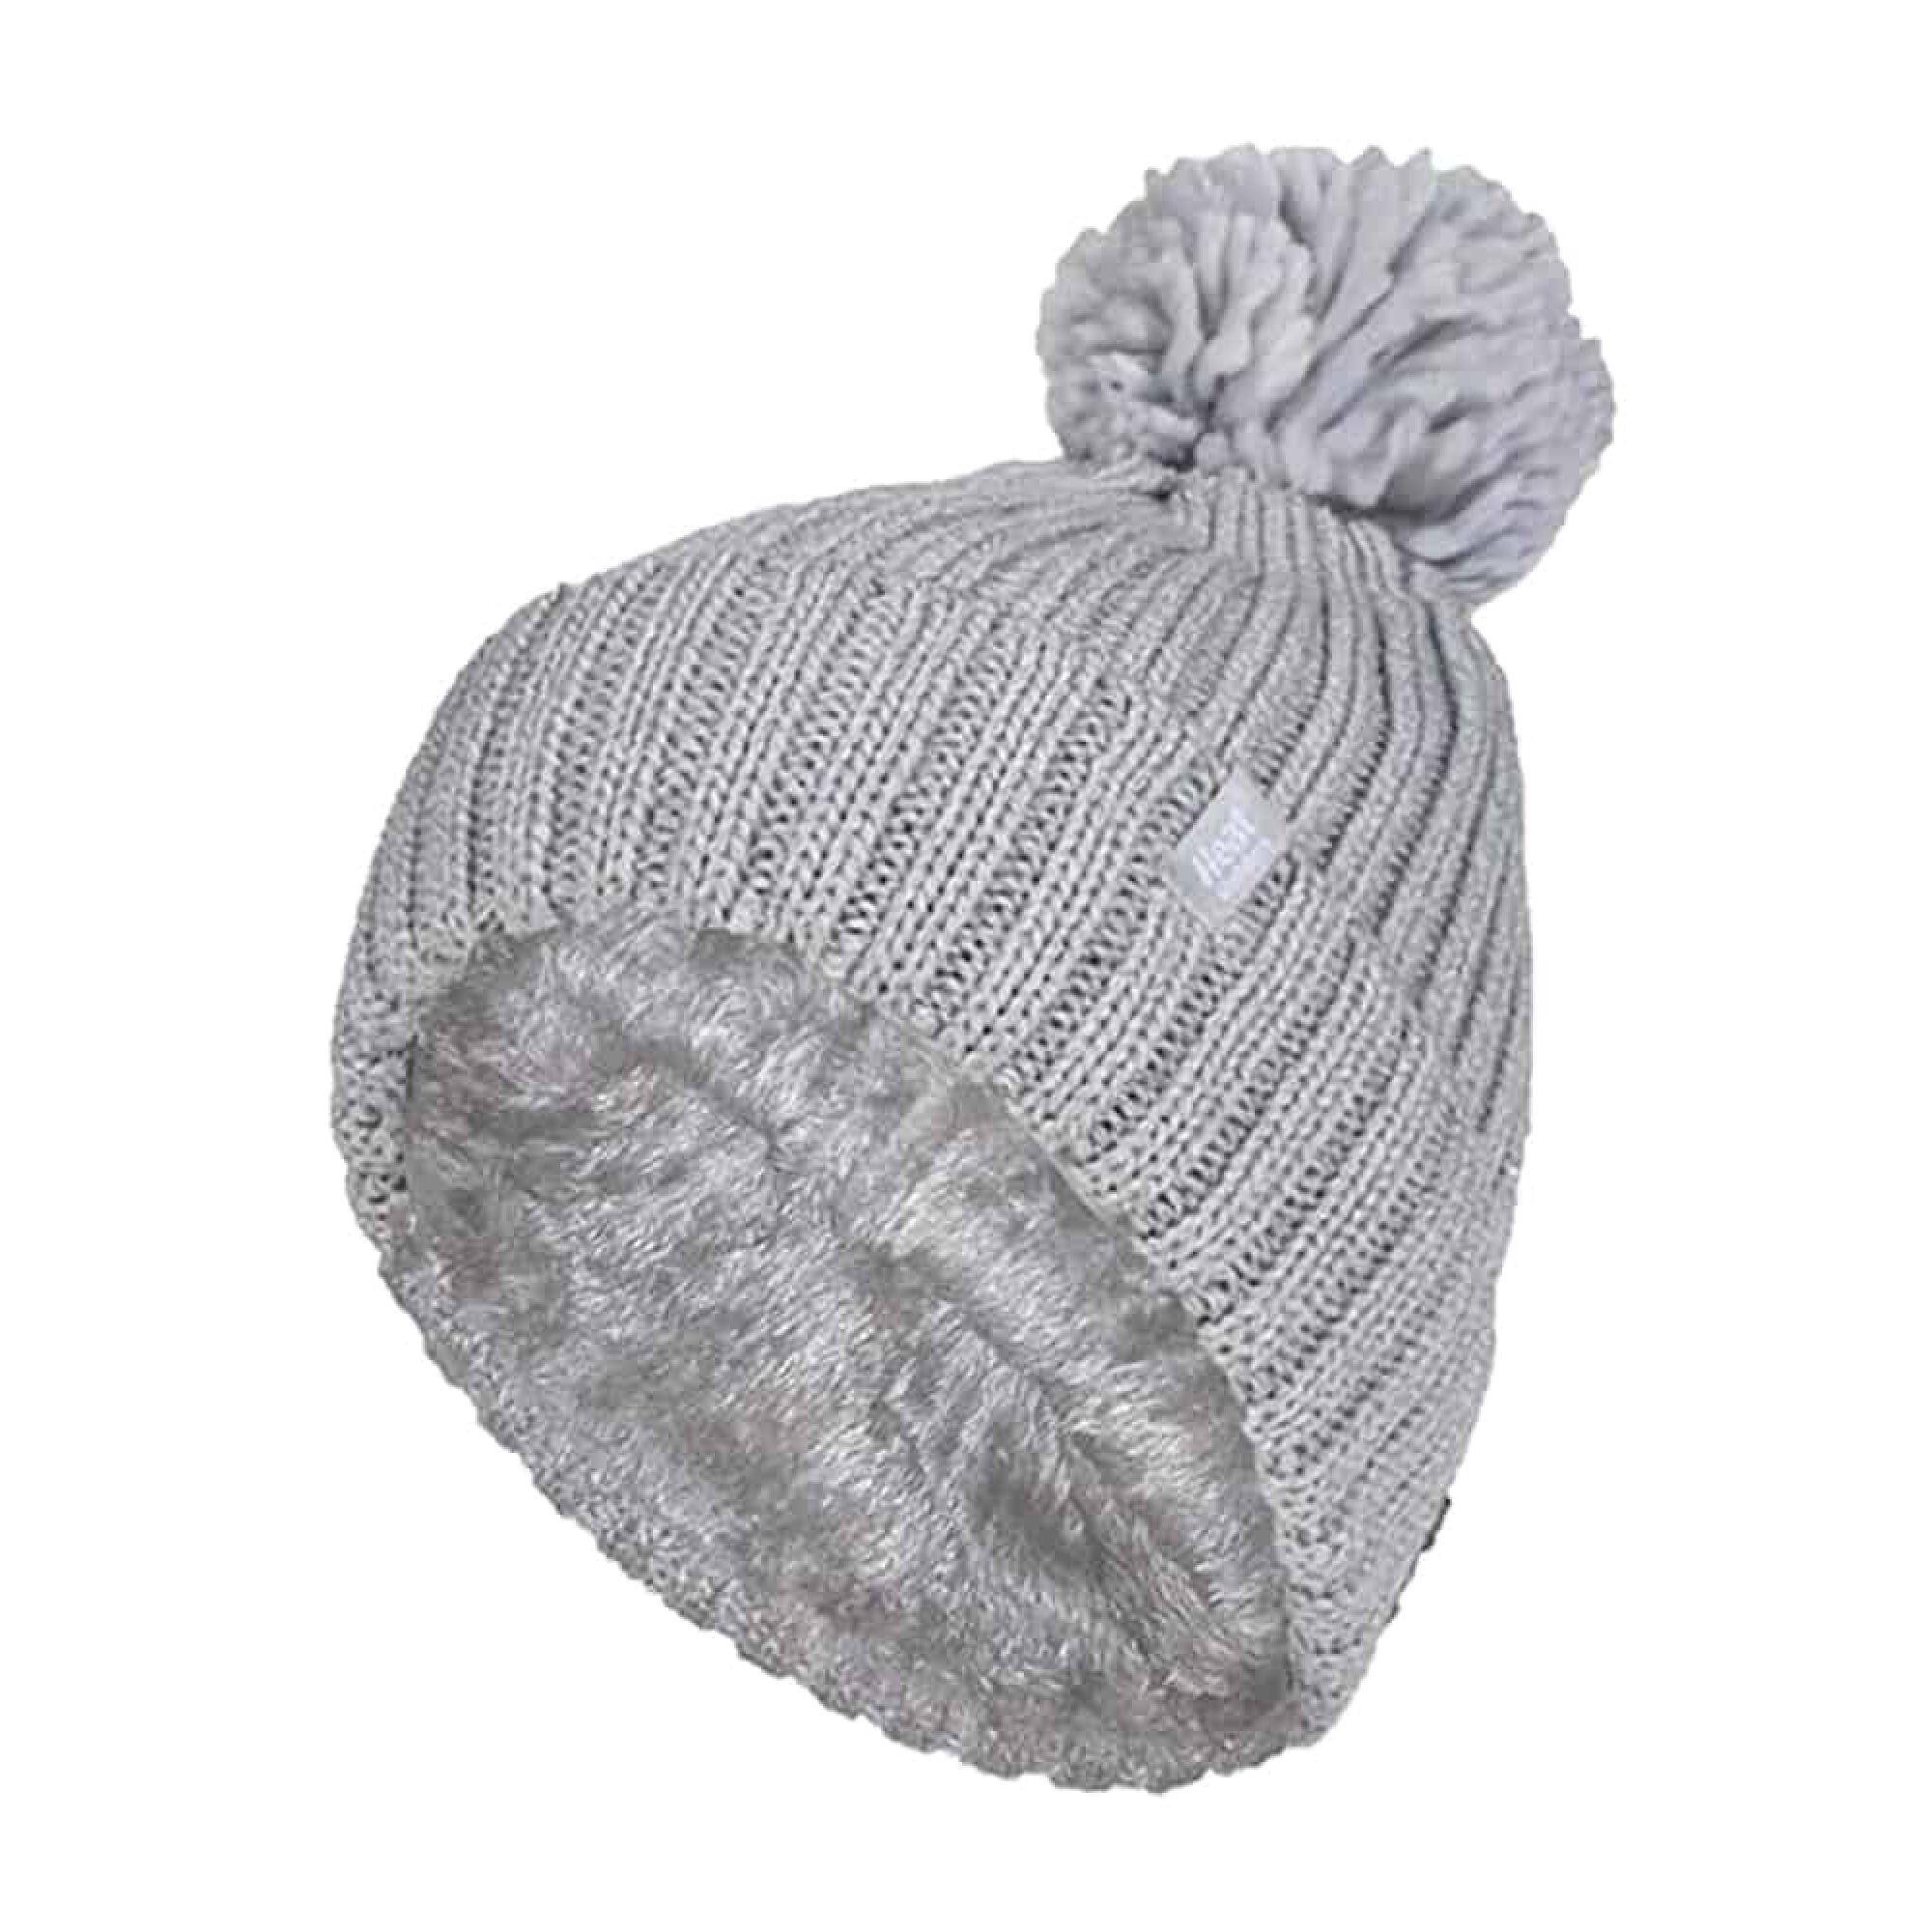 HEAT HOLDERS Ladies Ribbed Cuffed Thermal Insulated Winter Pom Pom Bobble Hat